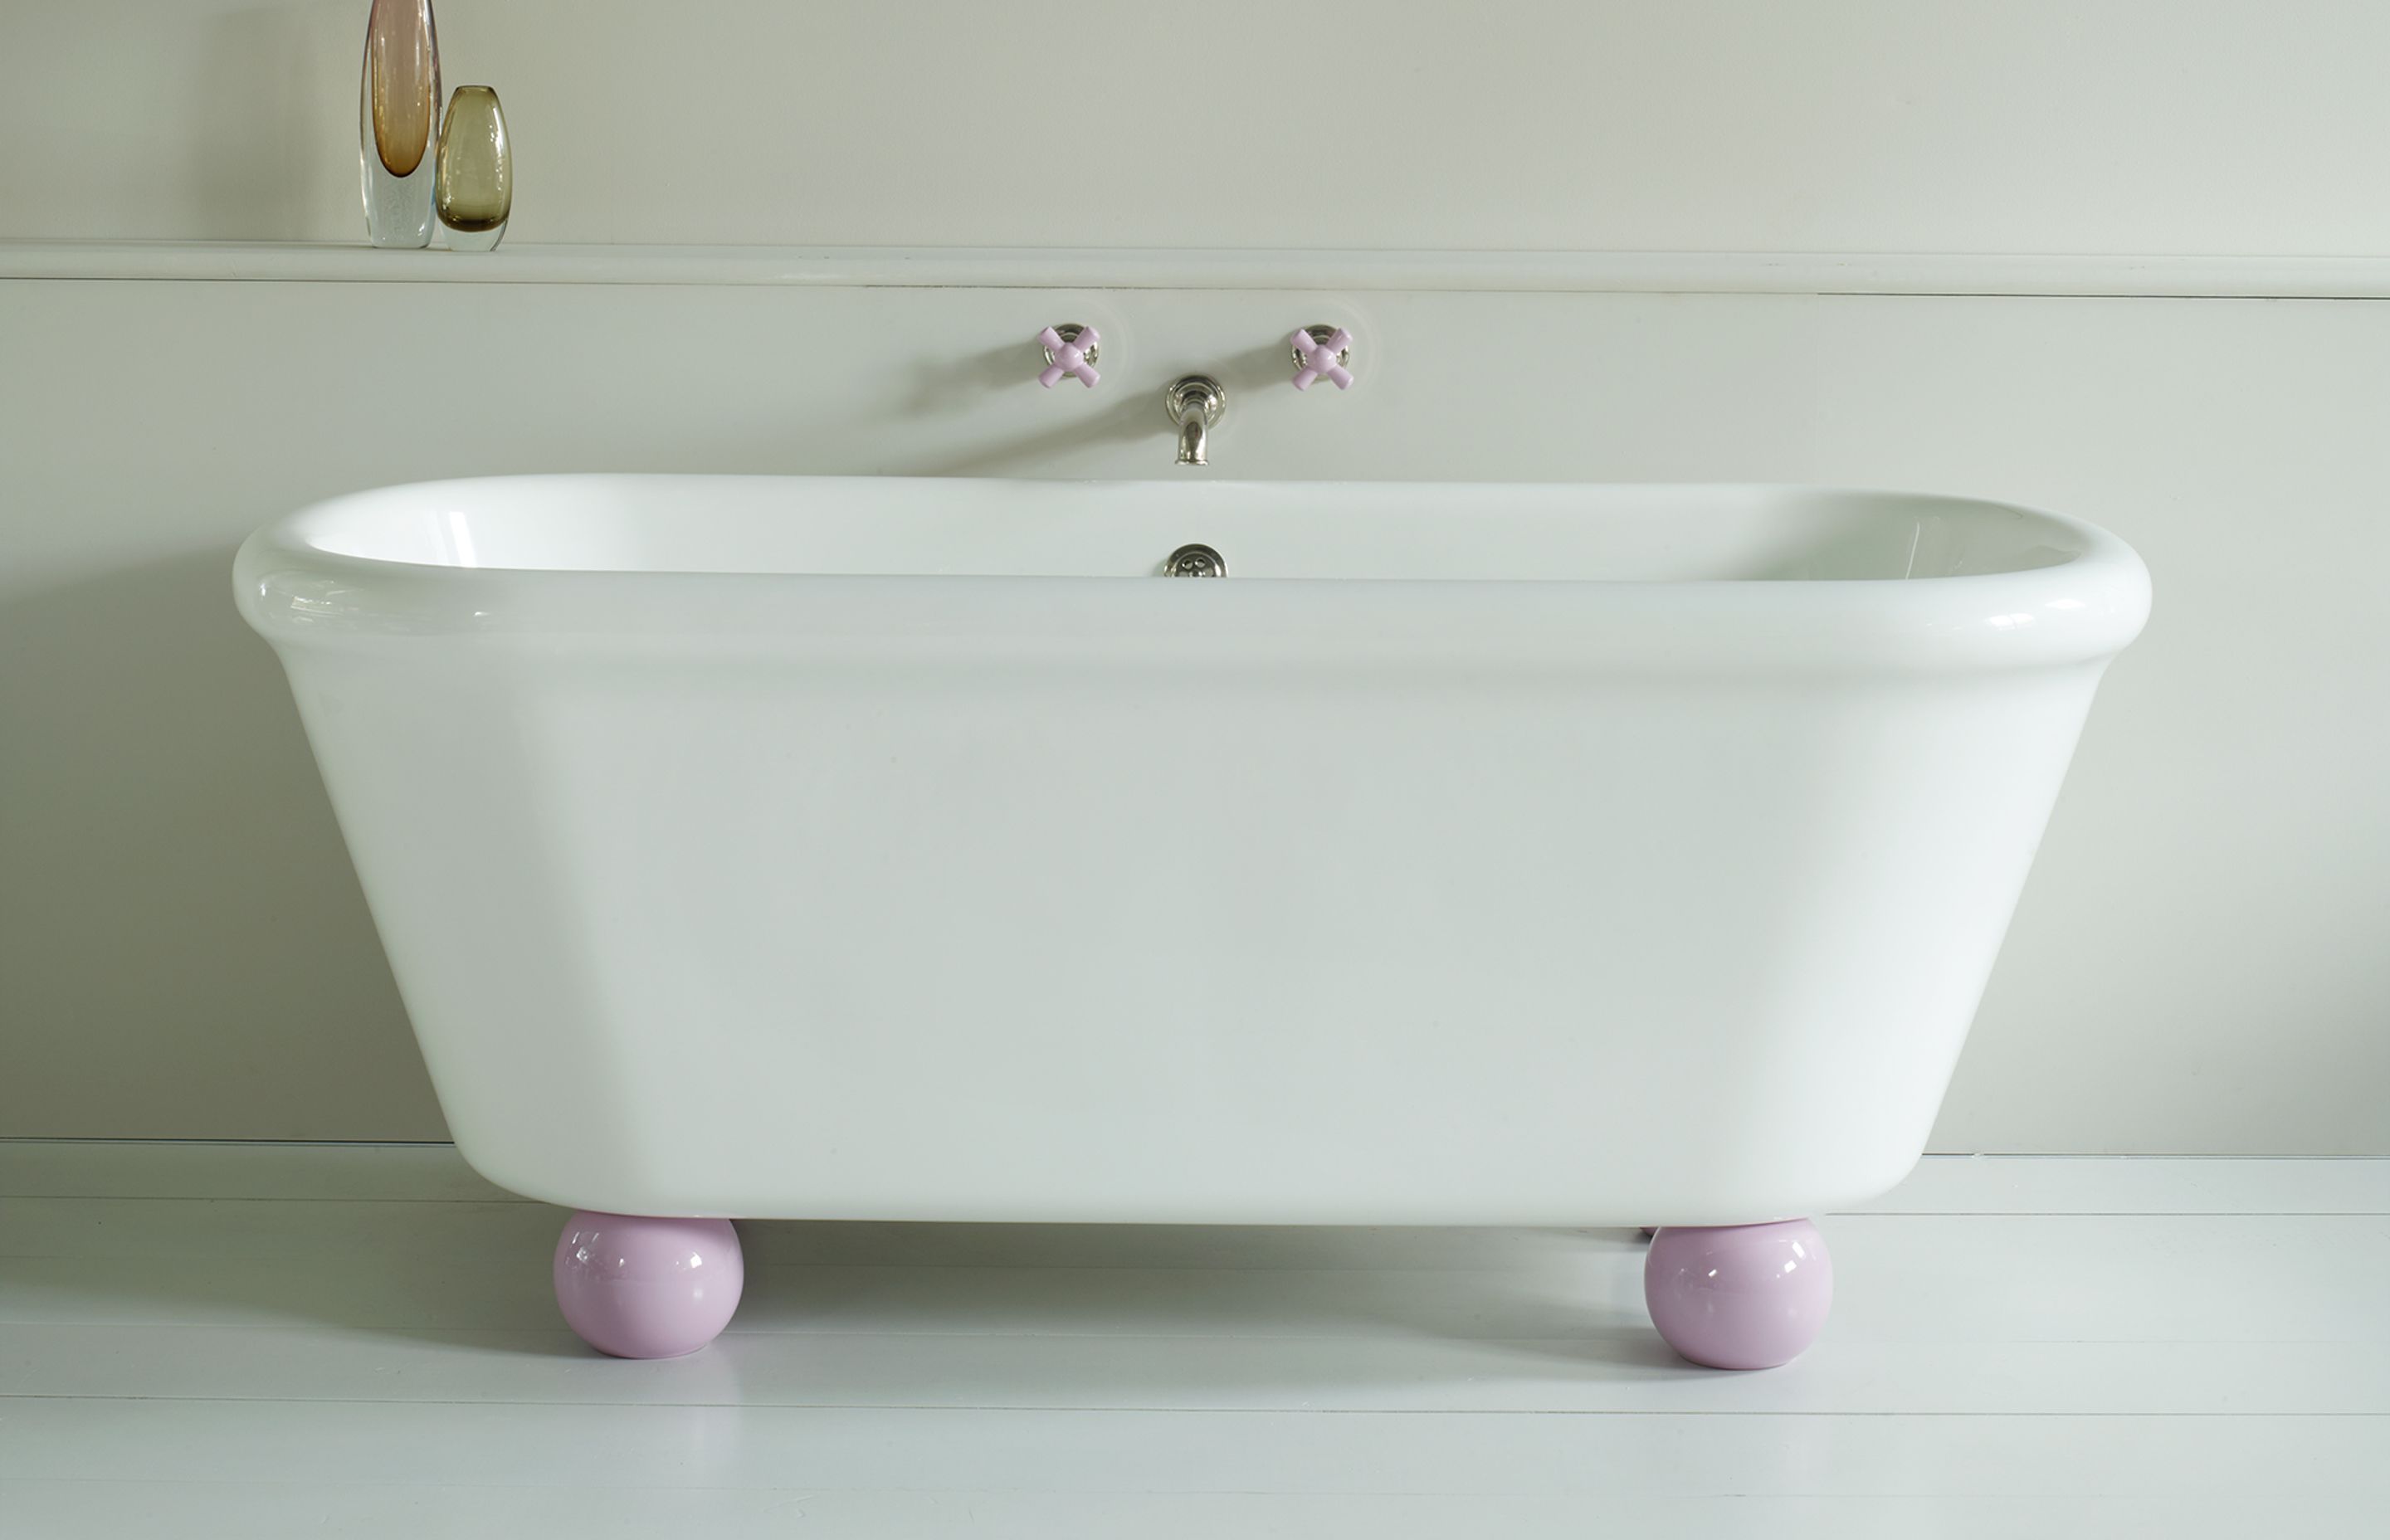 In colour: the top bathroomware styles and hues for 2020